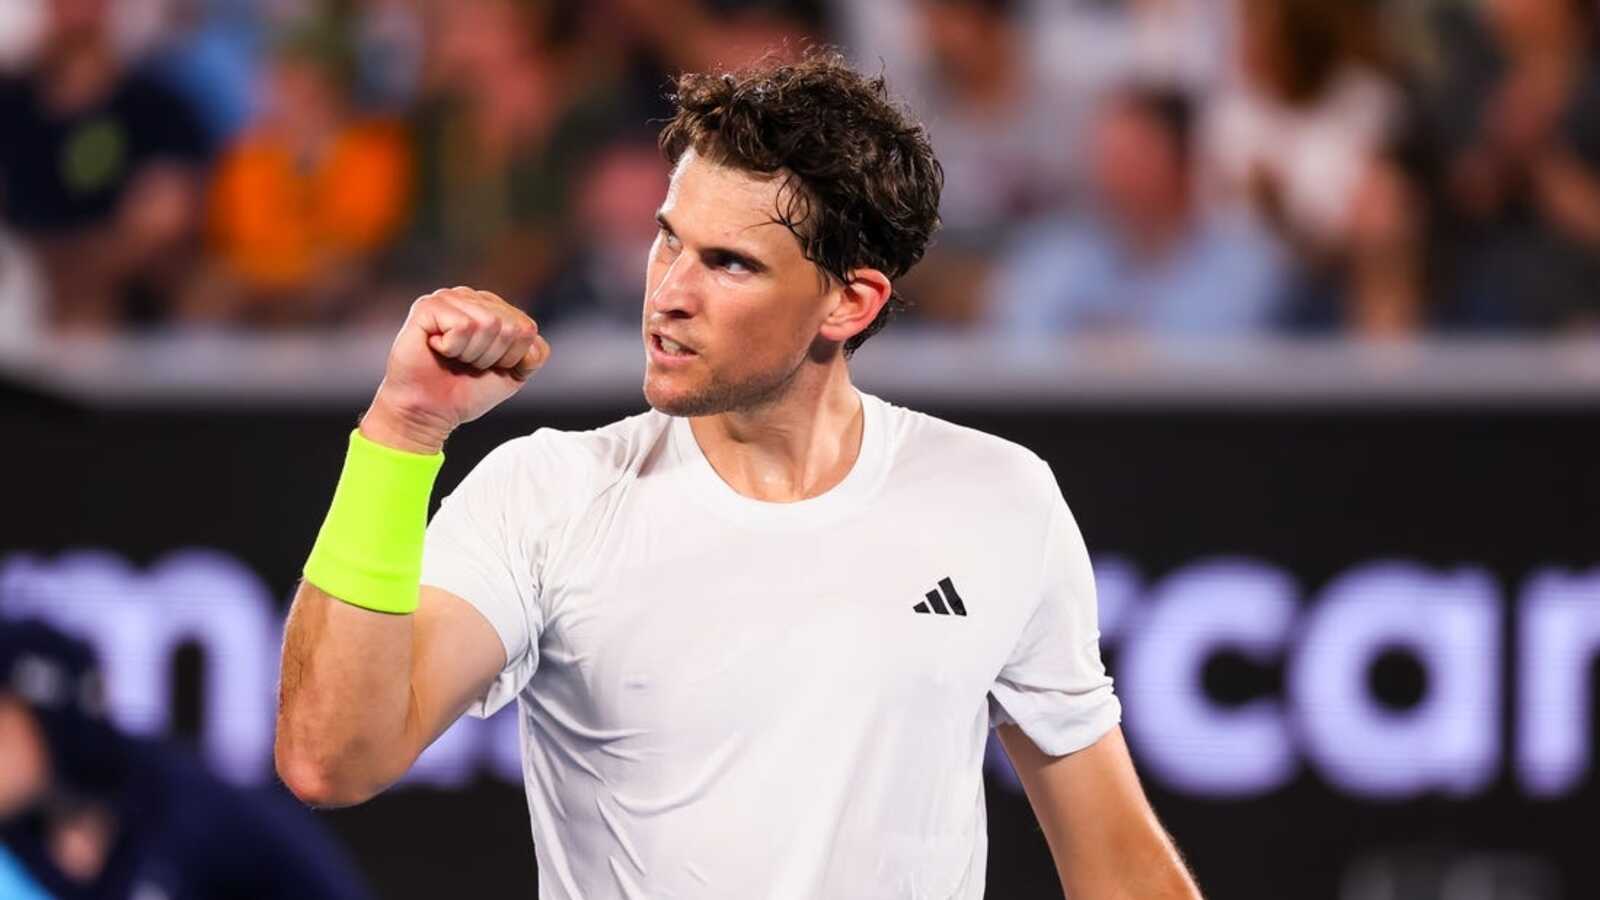 Former U.S. Open champ Dominic Thiem to retire at end of year